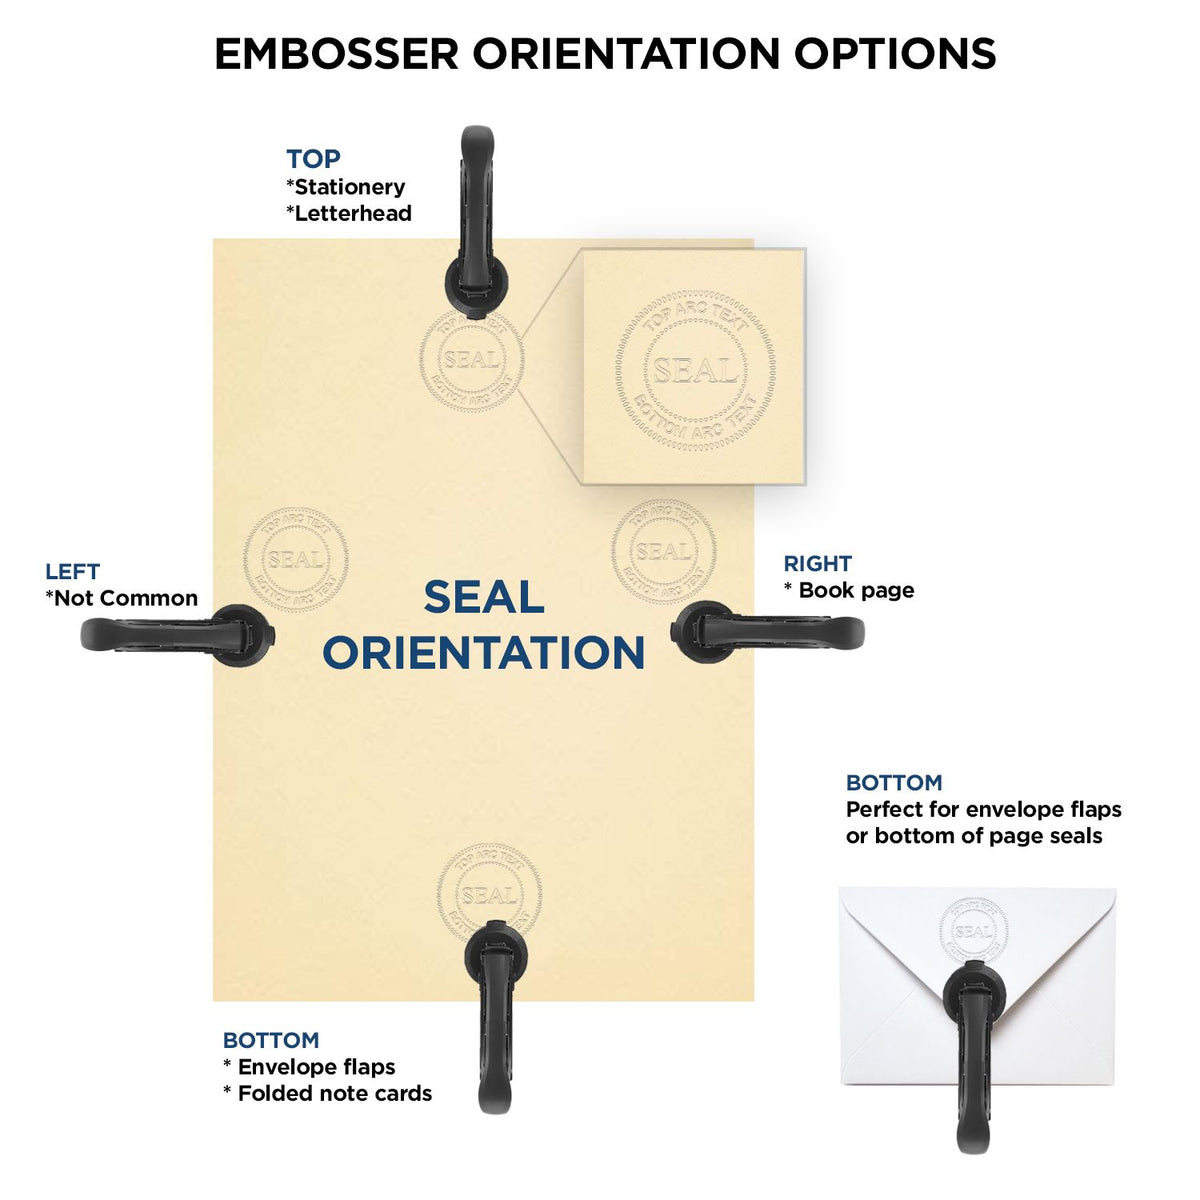 An infographic for the Heavy Duty Cast Iron North Carolina Engineer Seal Embosser showing embosser orientation, this is showing examples of a top, bottom, right and left insert.